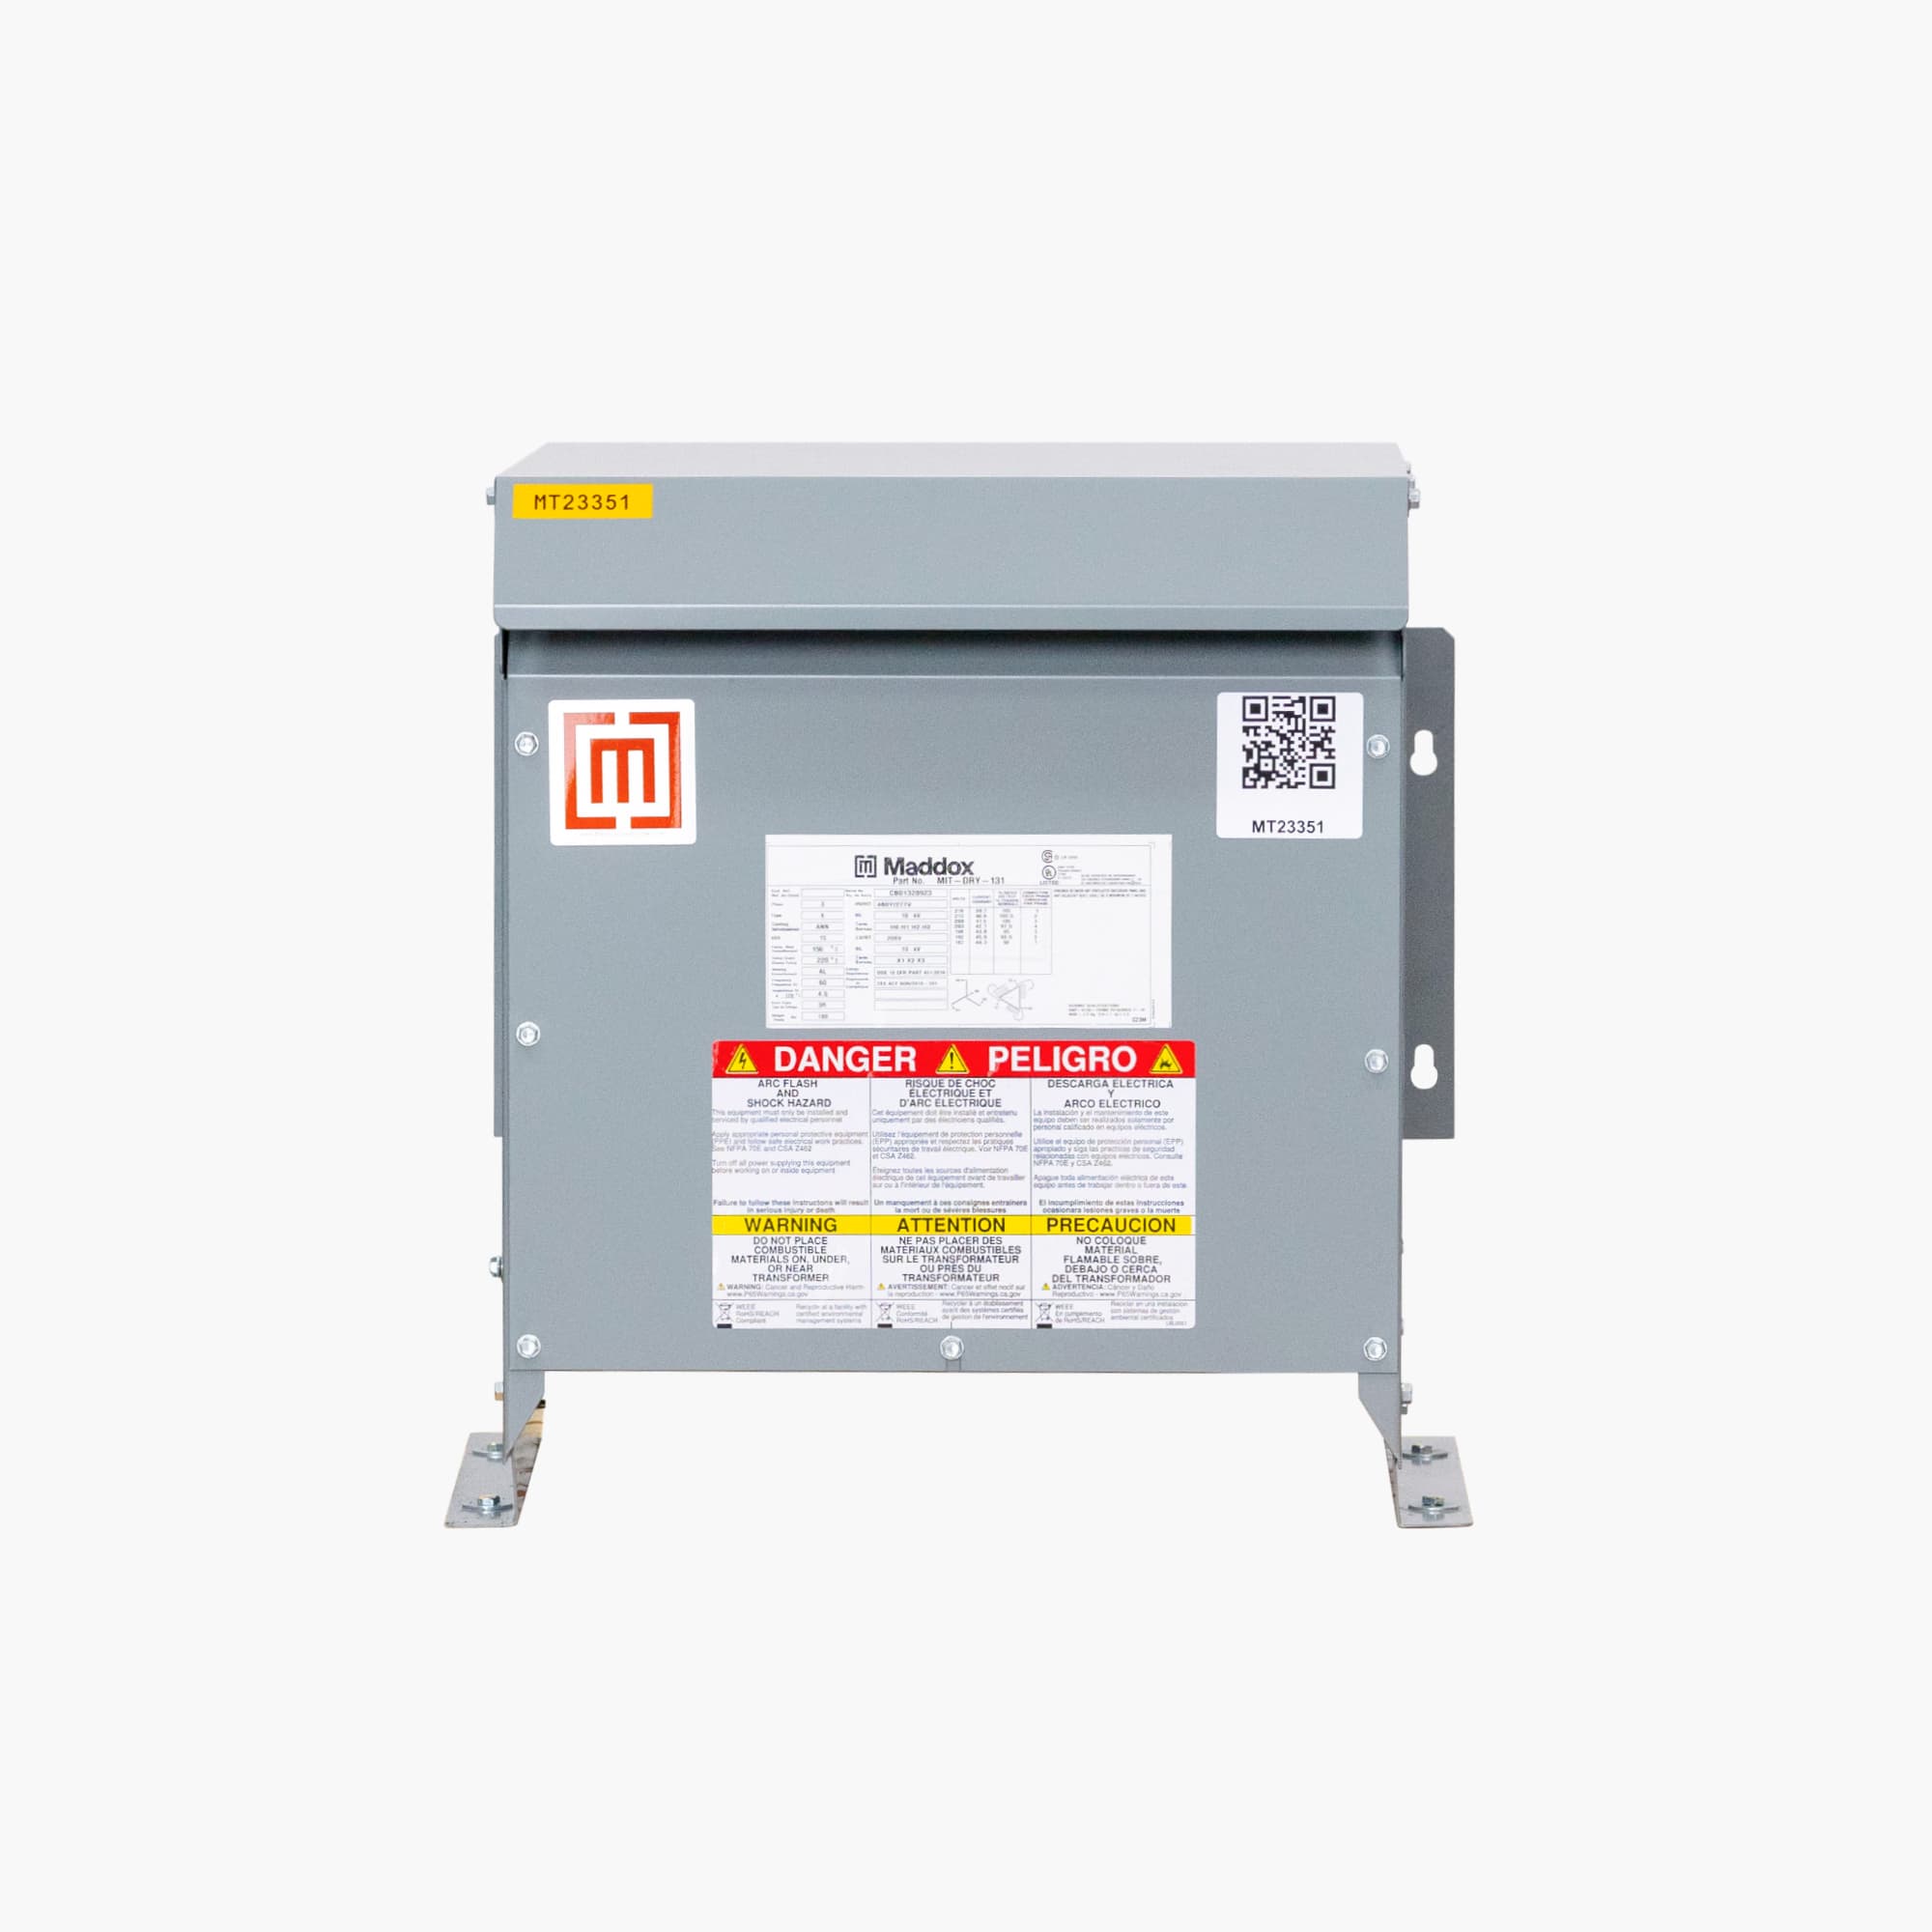 3-Phase 460 D - 460 Y 266 (Drive Isolation Transformer)